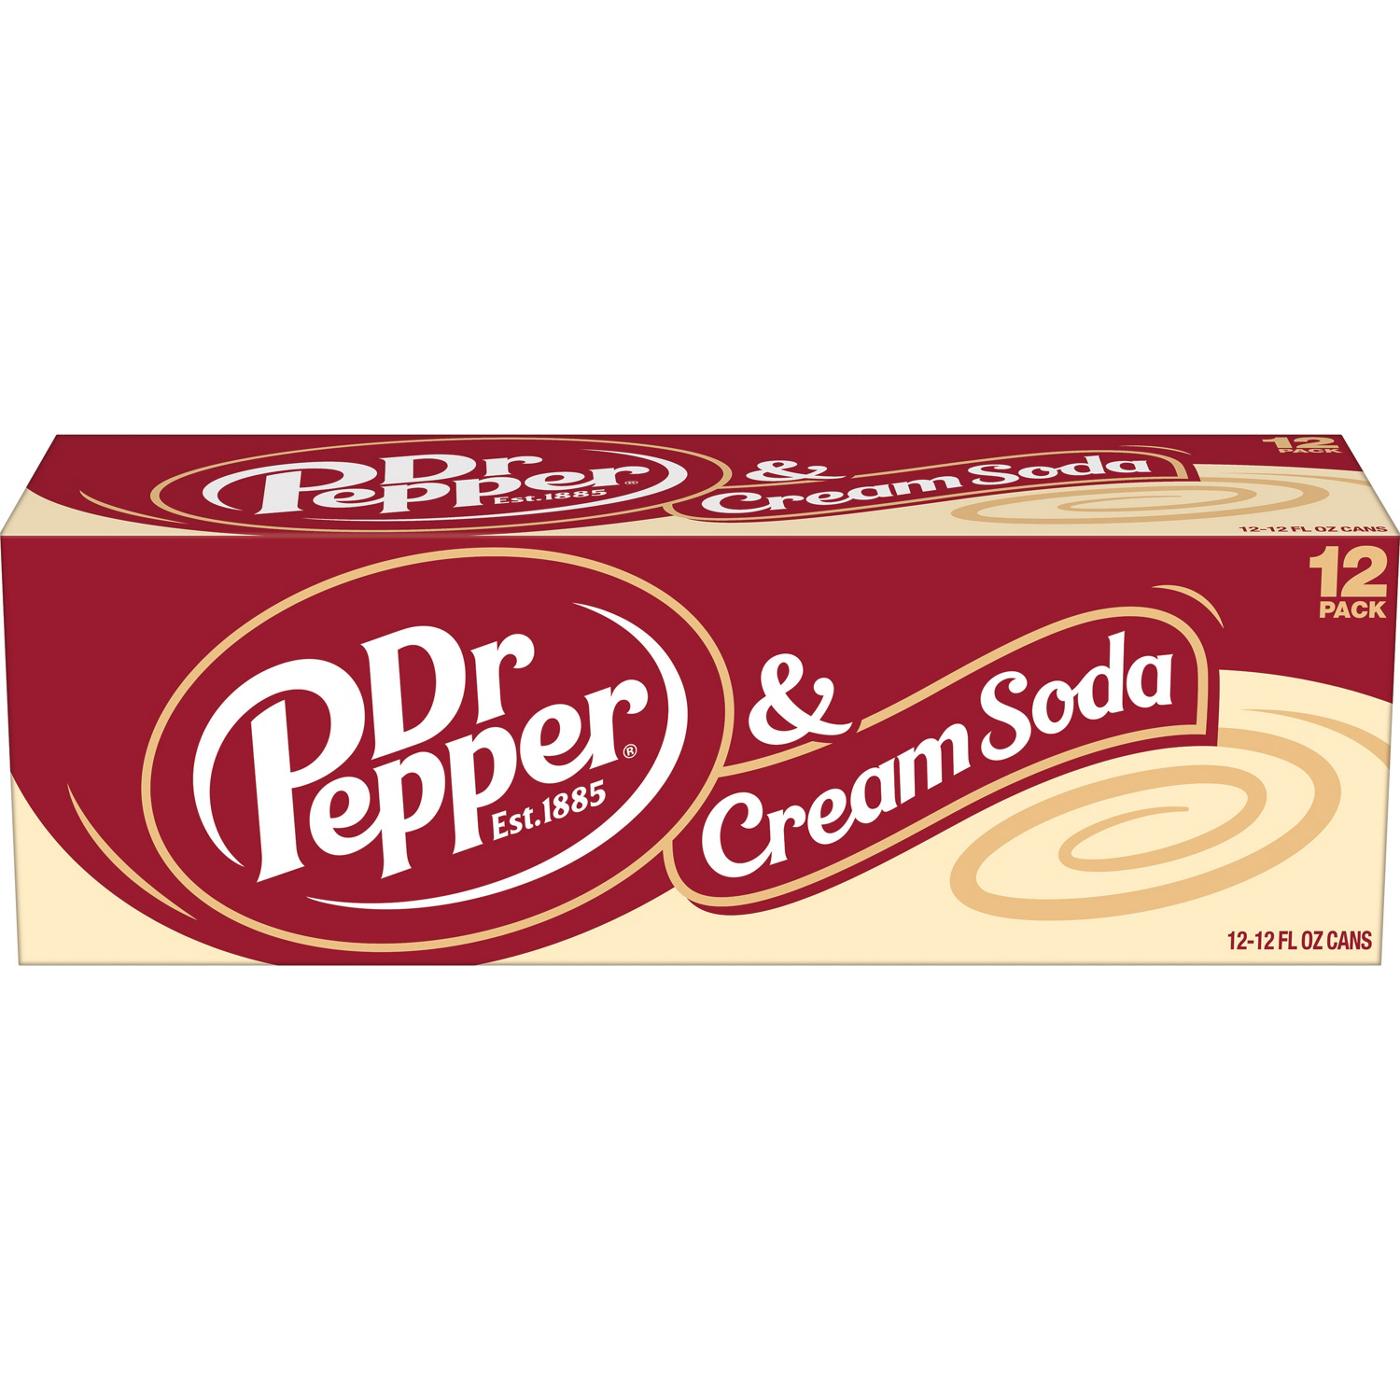 Dr Pepper & Cream Soda 12 oz Cans; image 1 of 7